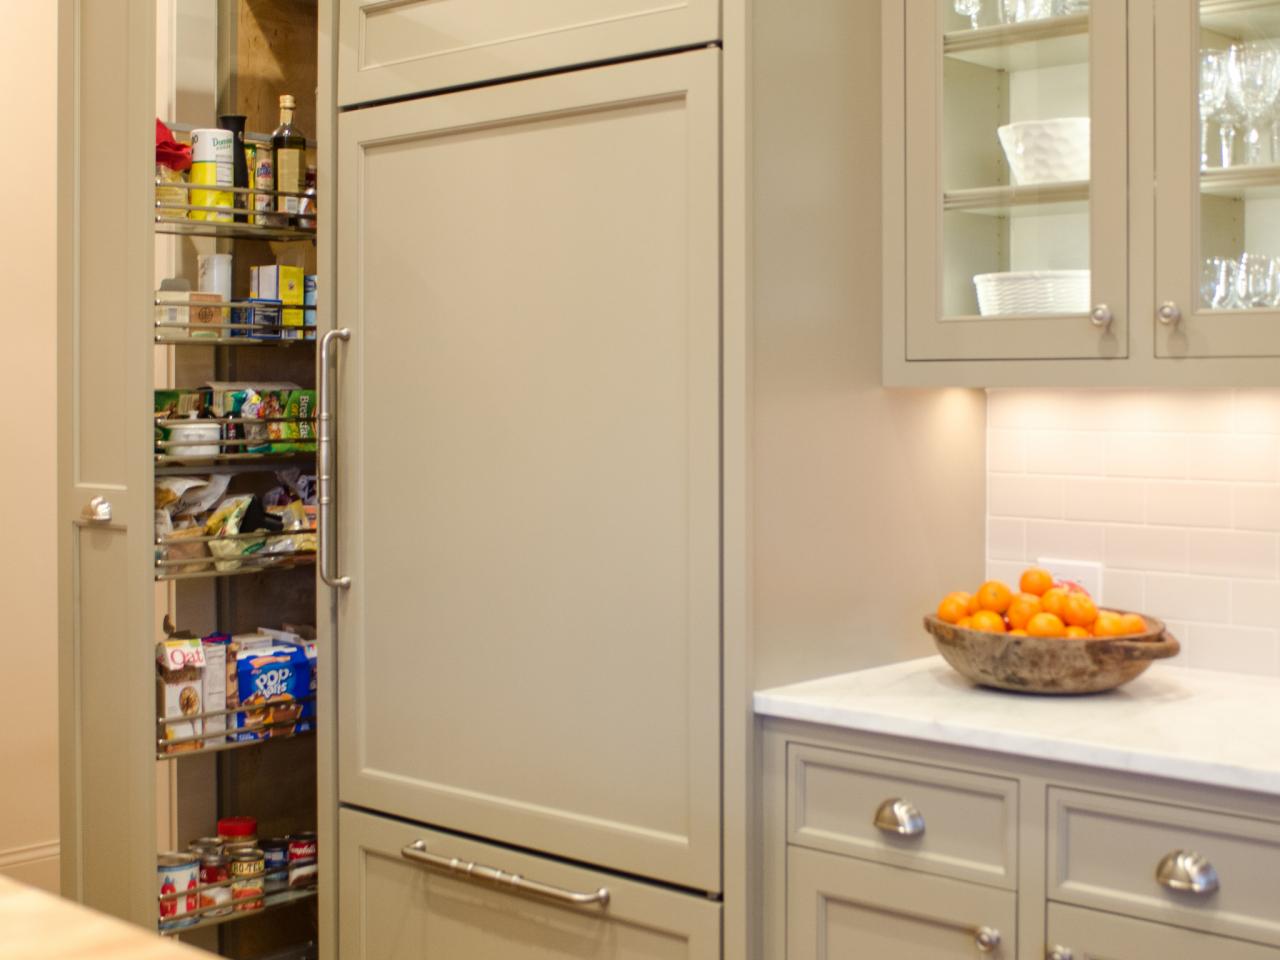 Pantry Cabinet Plans Pictures Options, Kitchen Cabinet Pantry Plans